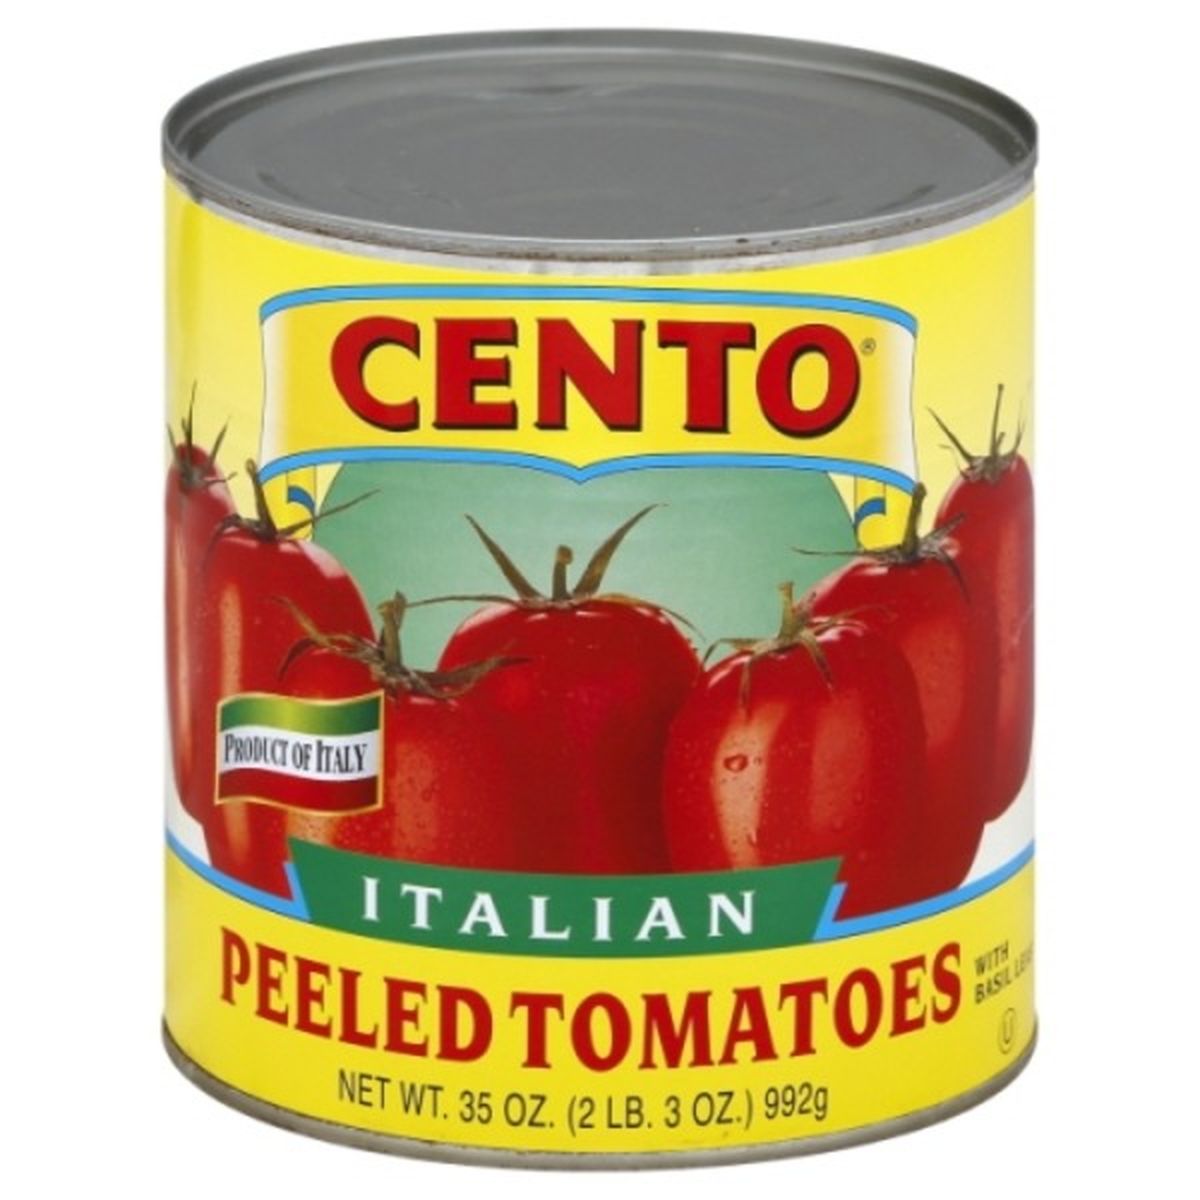 Calories in Cento Tomatoes, Italian, with Basil Leaf, Peeled